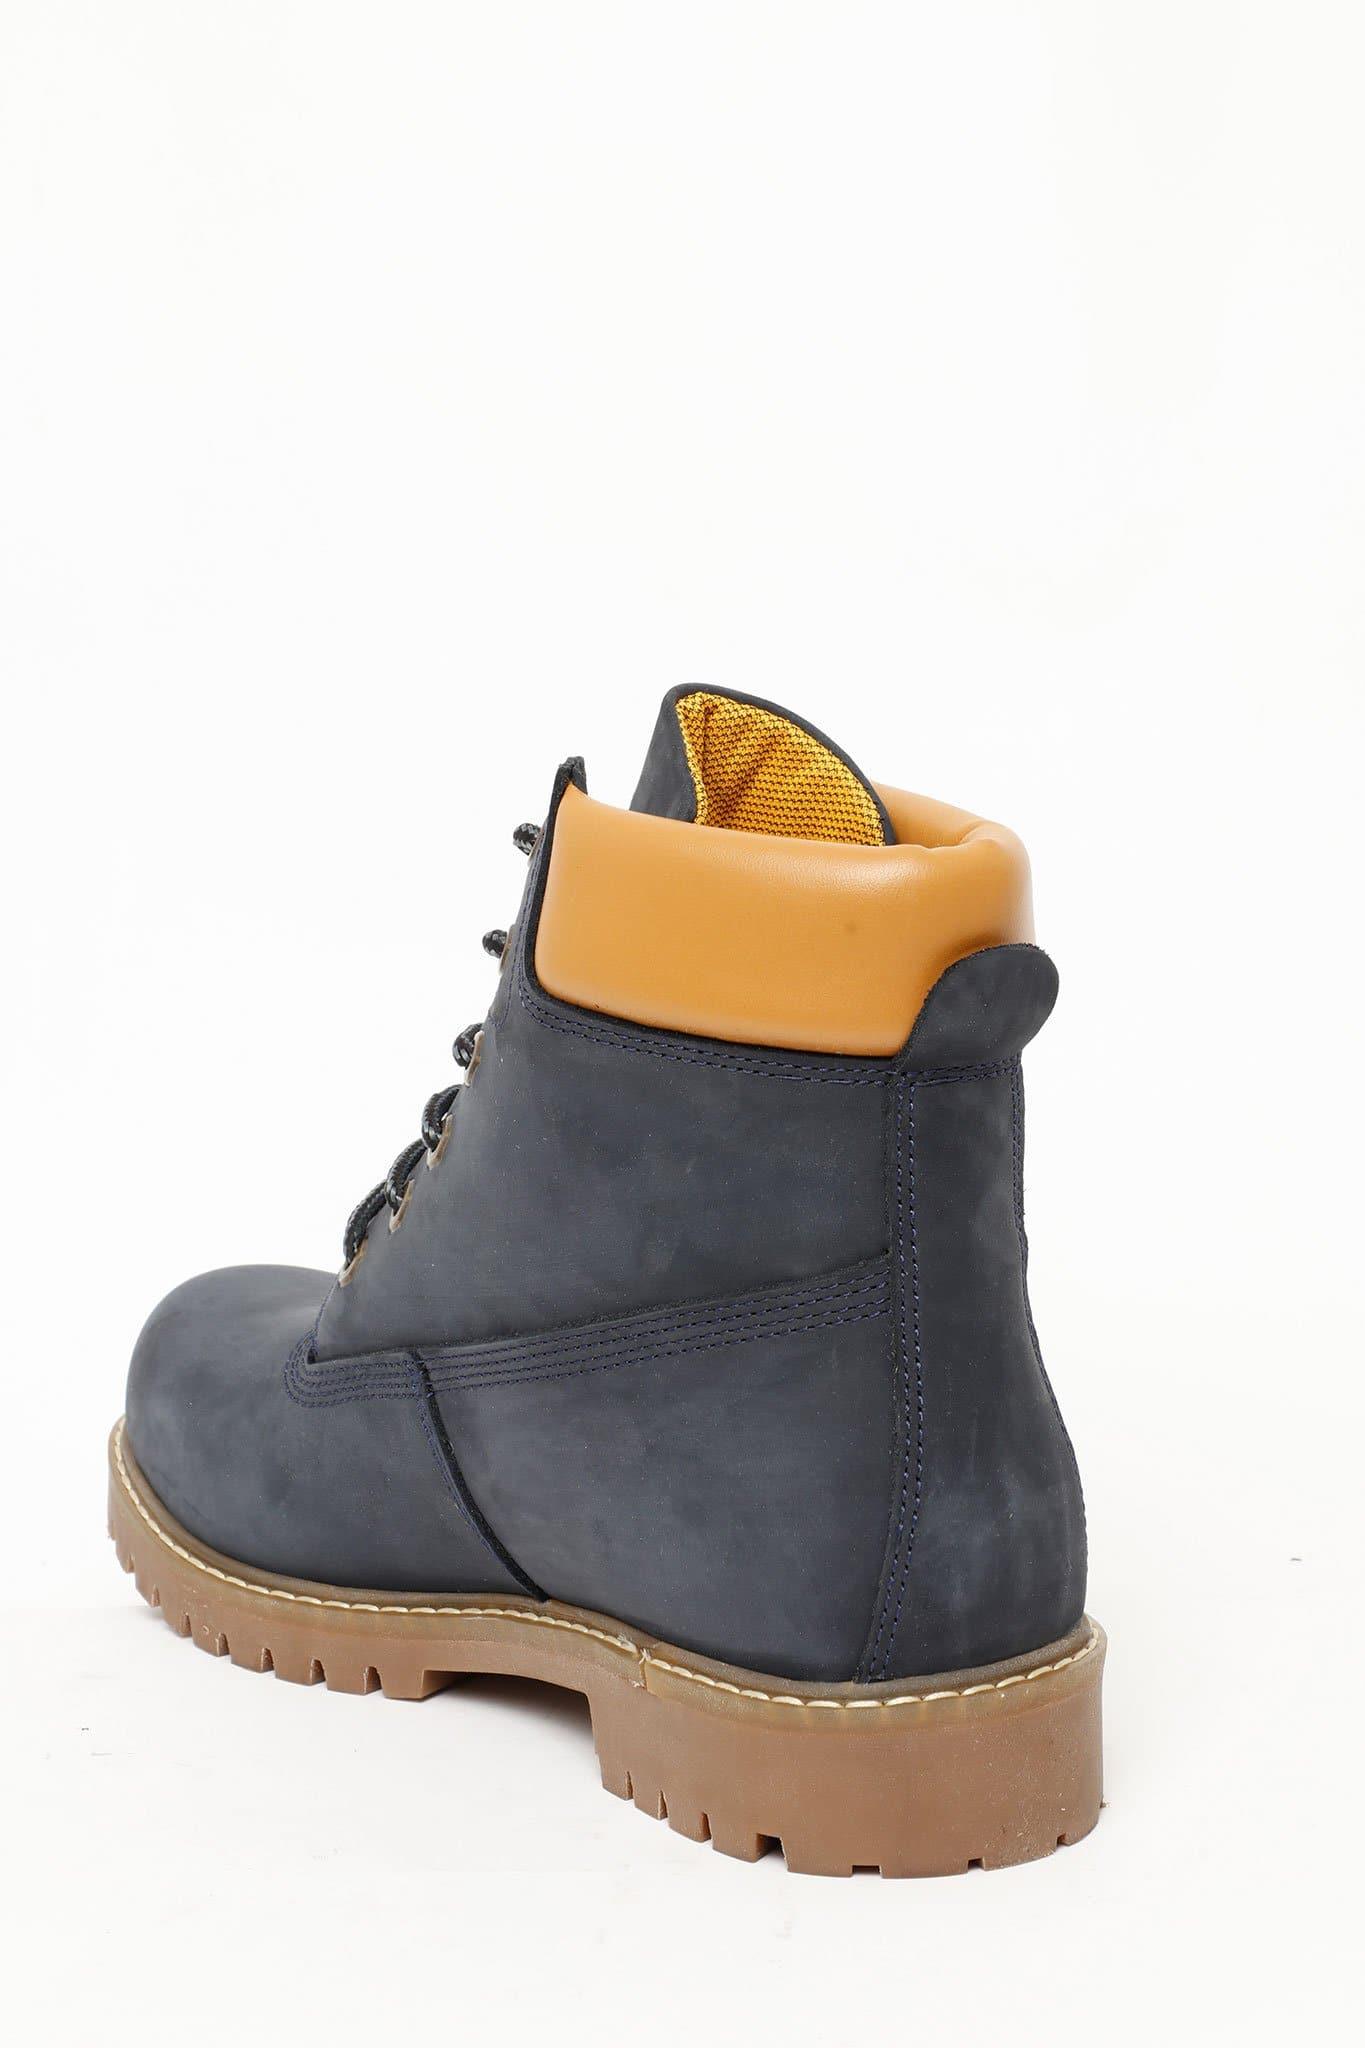 PB CATTER FAS BOOTS 10589, SHOE, CORADO, blue, boots, leather, men, shoe, suede, coradomoda, coradomoda.com